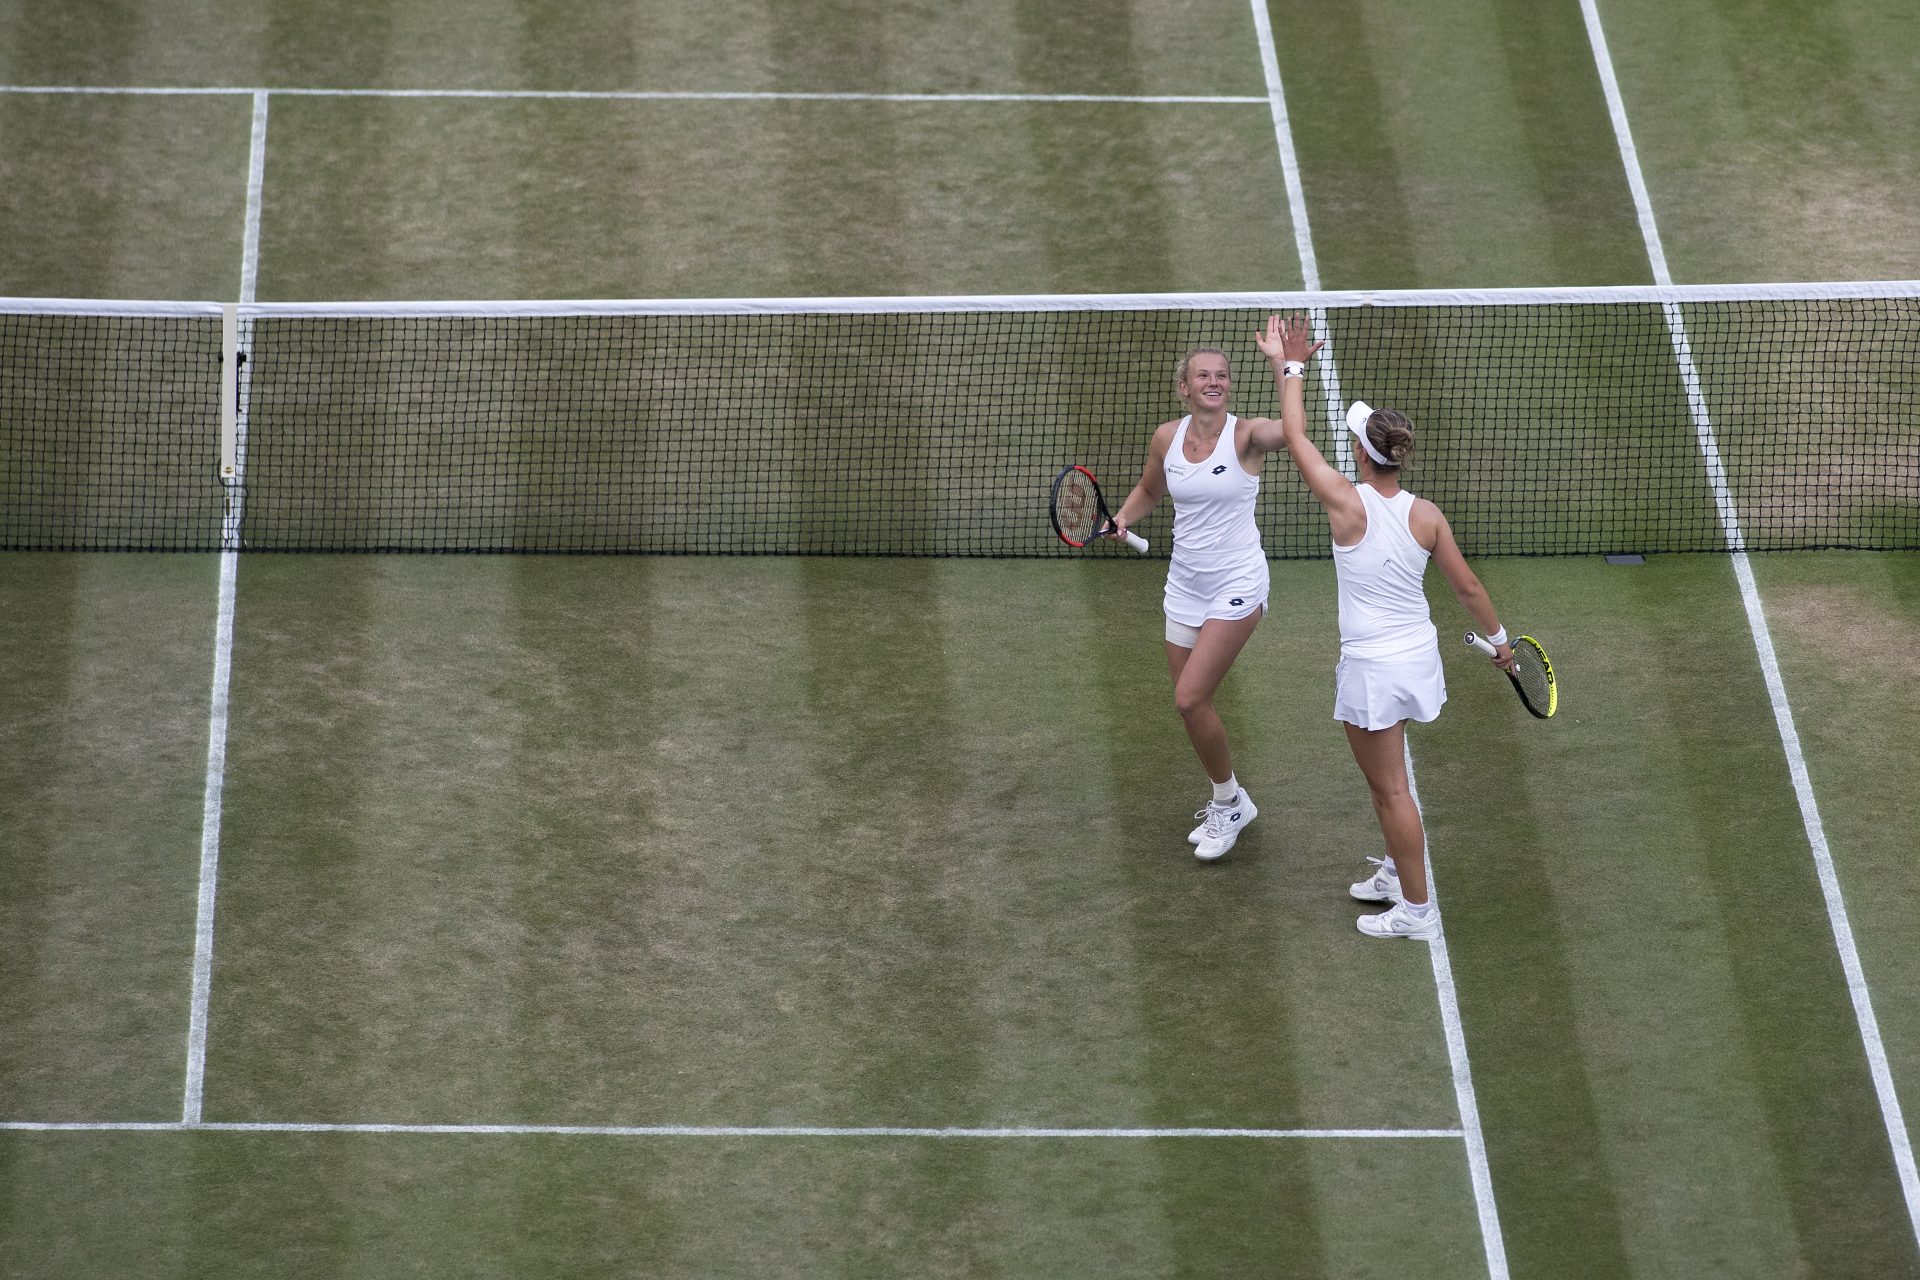 How Female Players Are Responding To Wimbledon Dress Code Changes